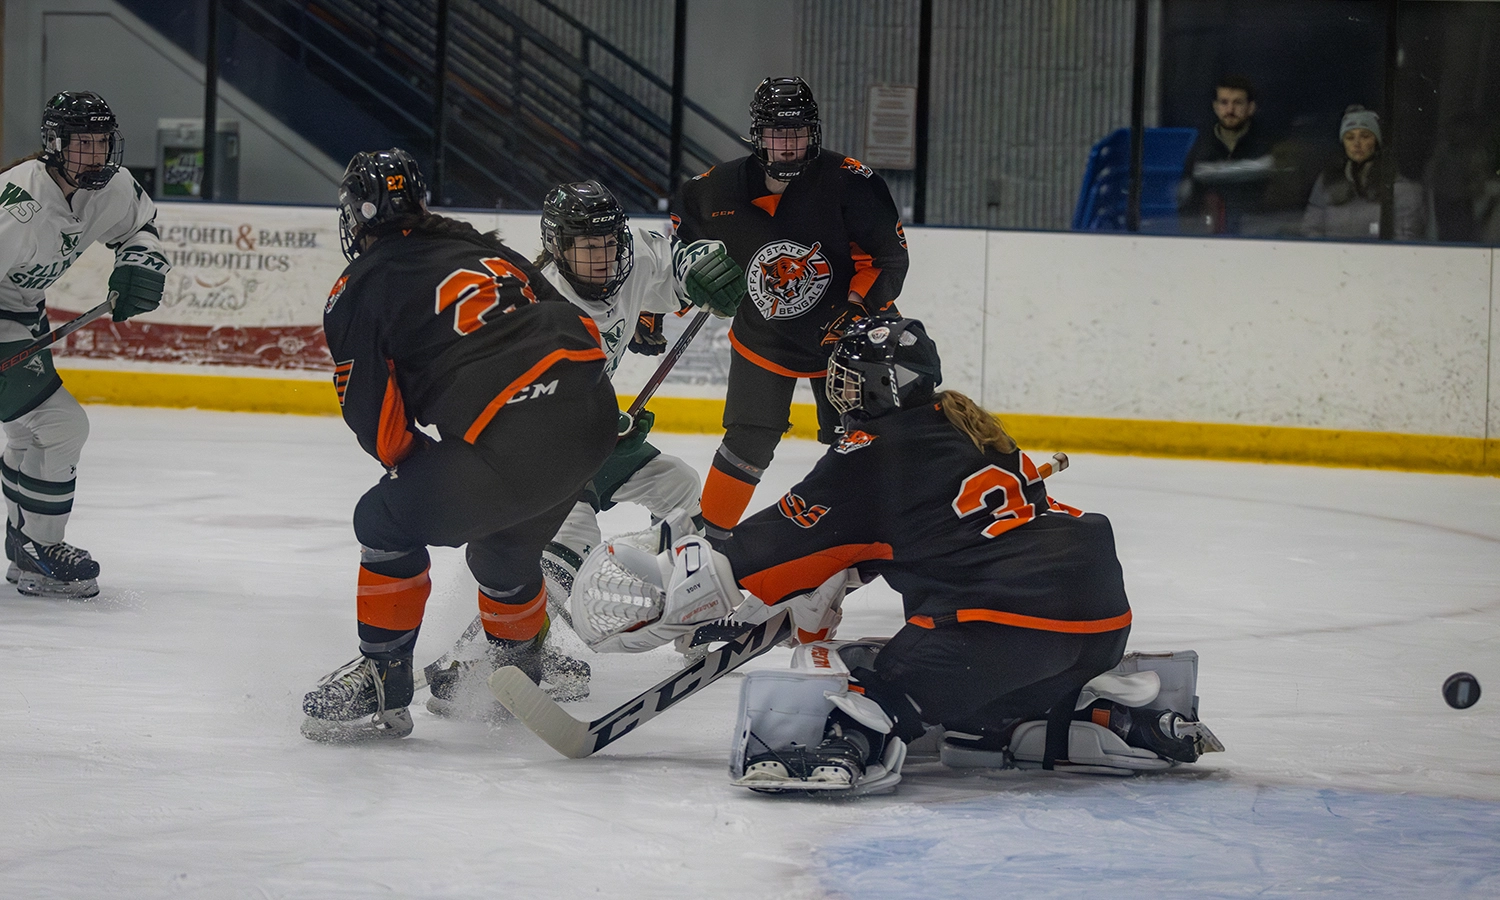 Kelly Howe ’26 fires a shot past the Buffalo State goaltender. She scored once in each period for her first collegiate hat trick, leading the Heron hockey team to its eighth straight win.